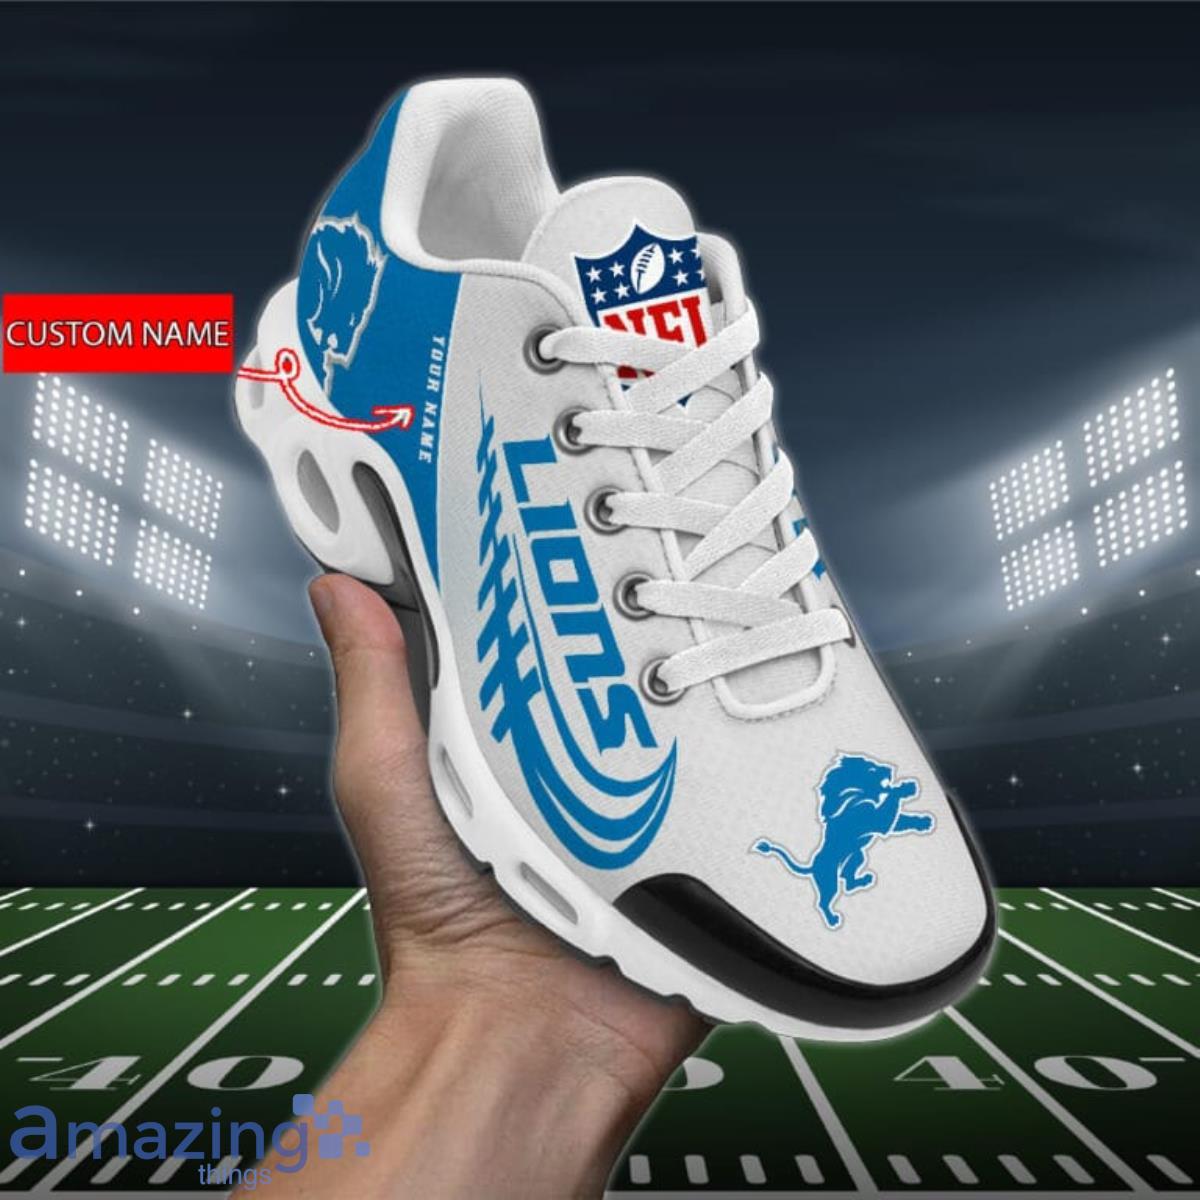 Detroit Lions NFL Air Cushion Sports Shoes Custom Name For Real Fans